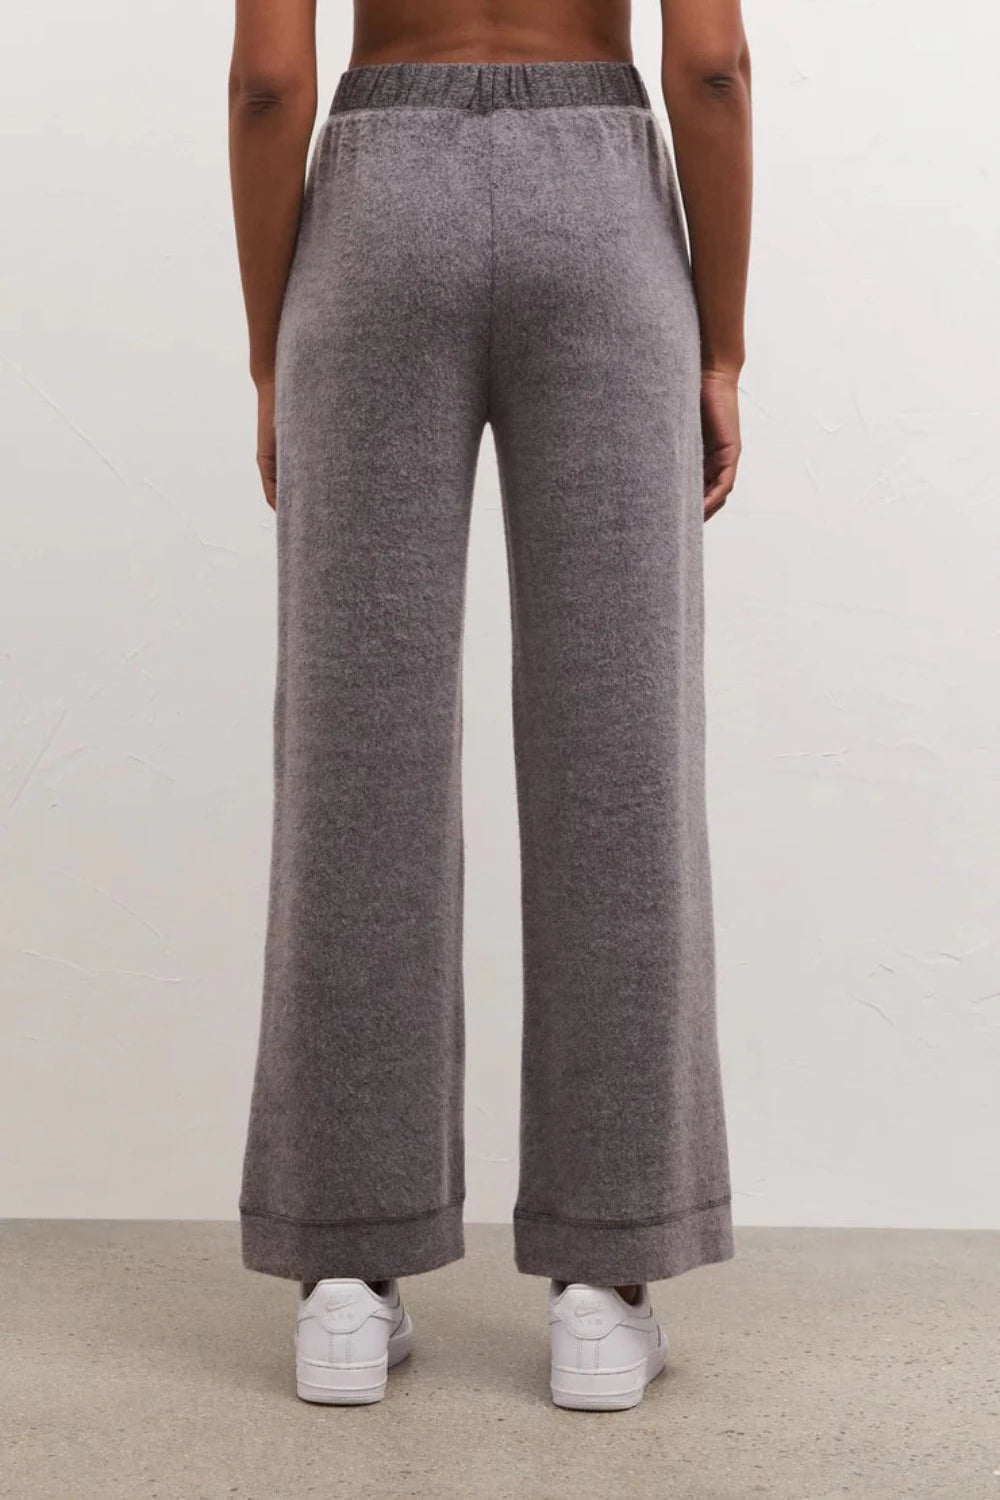 Tessa Cozy Pant in Charcoal Heather